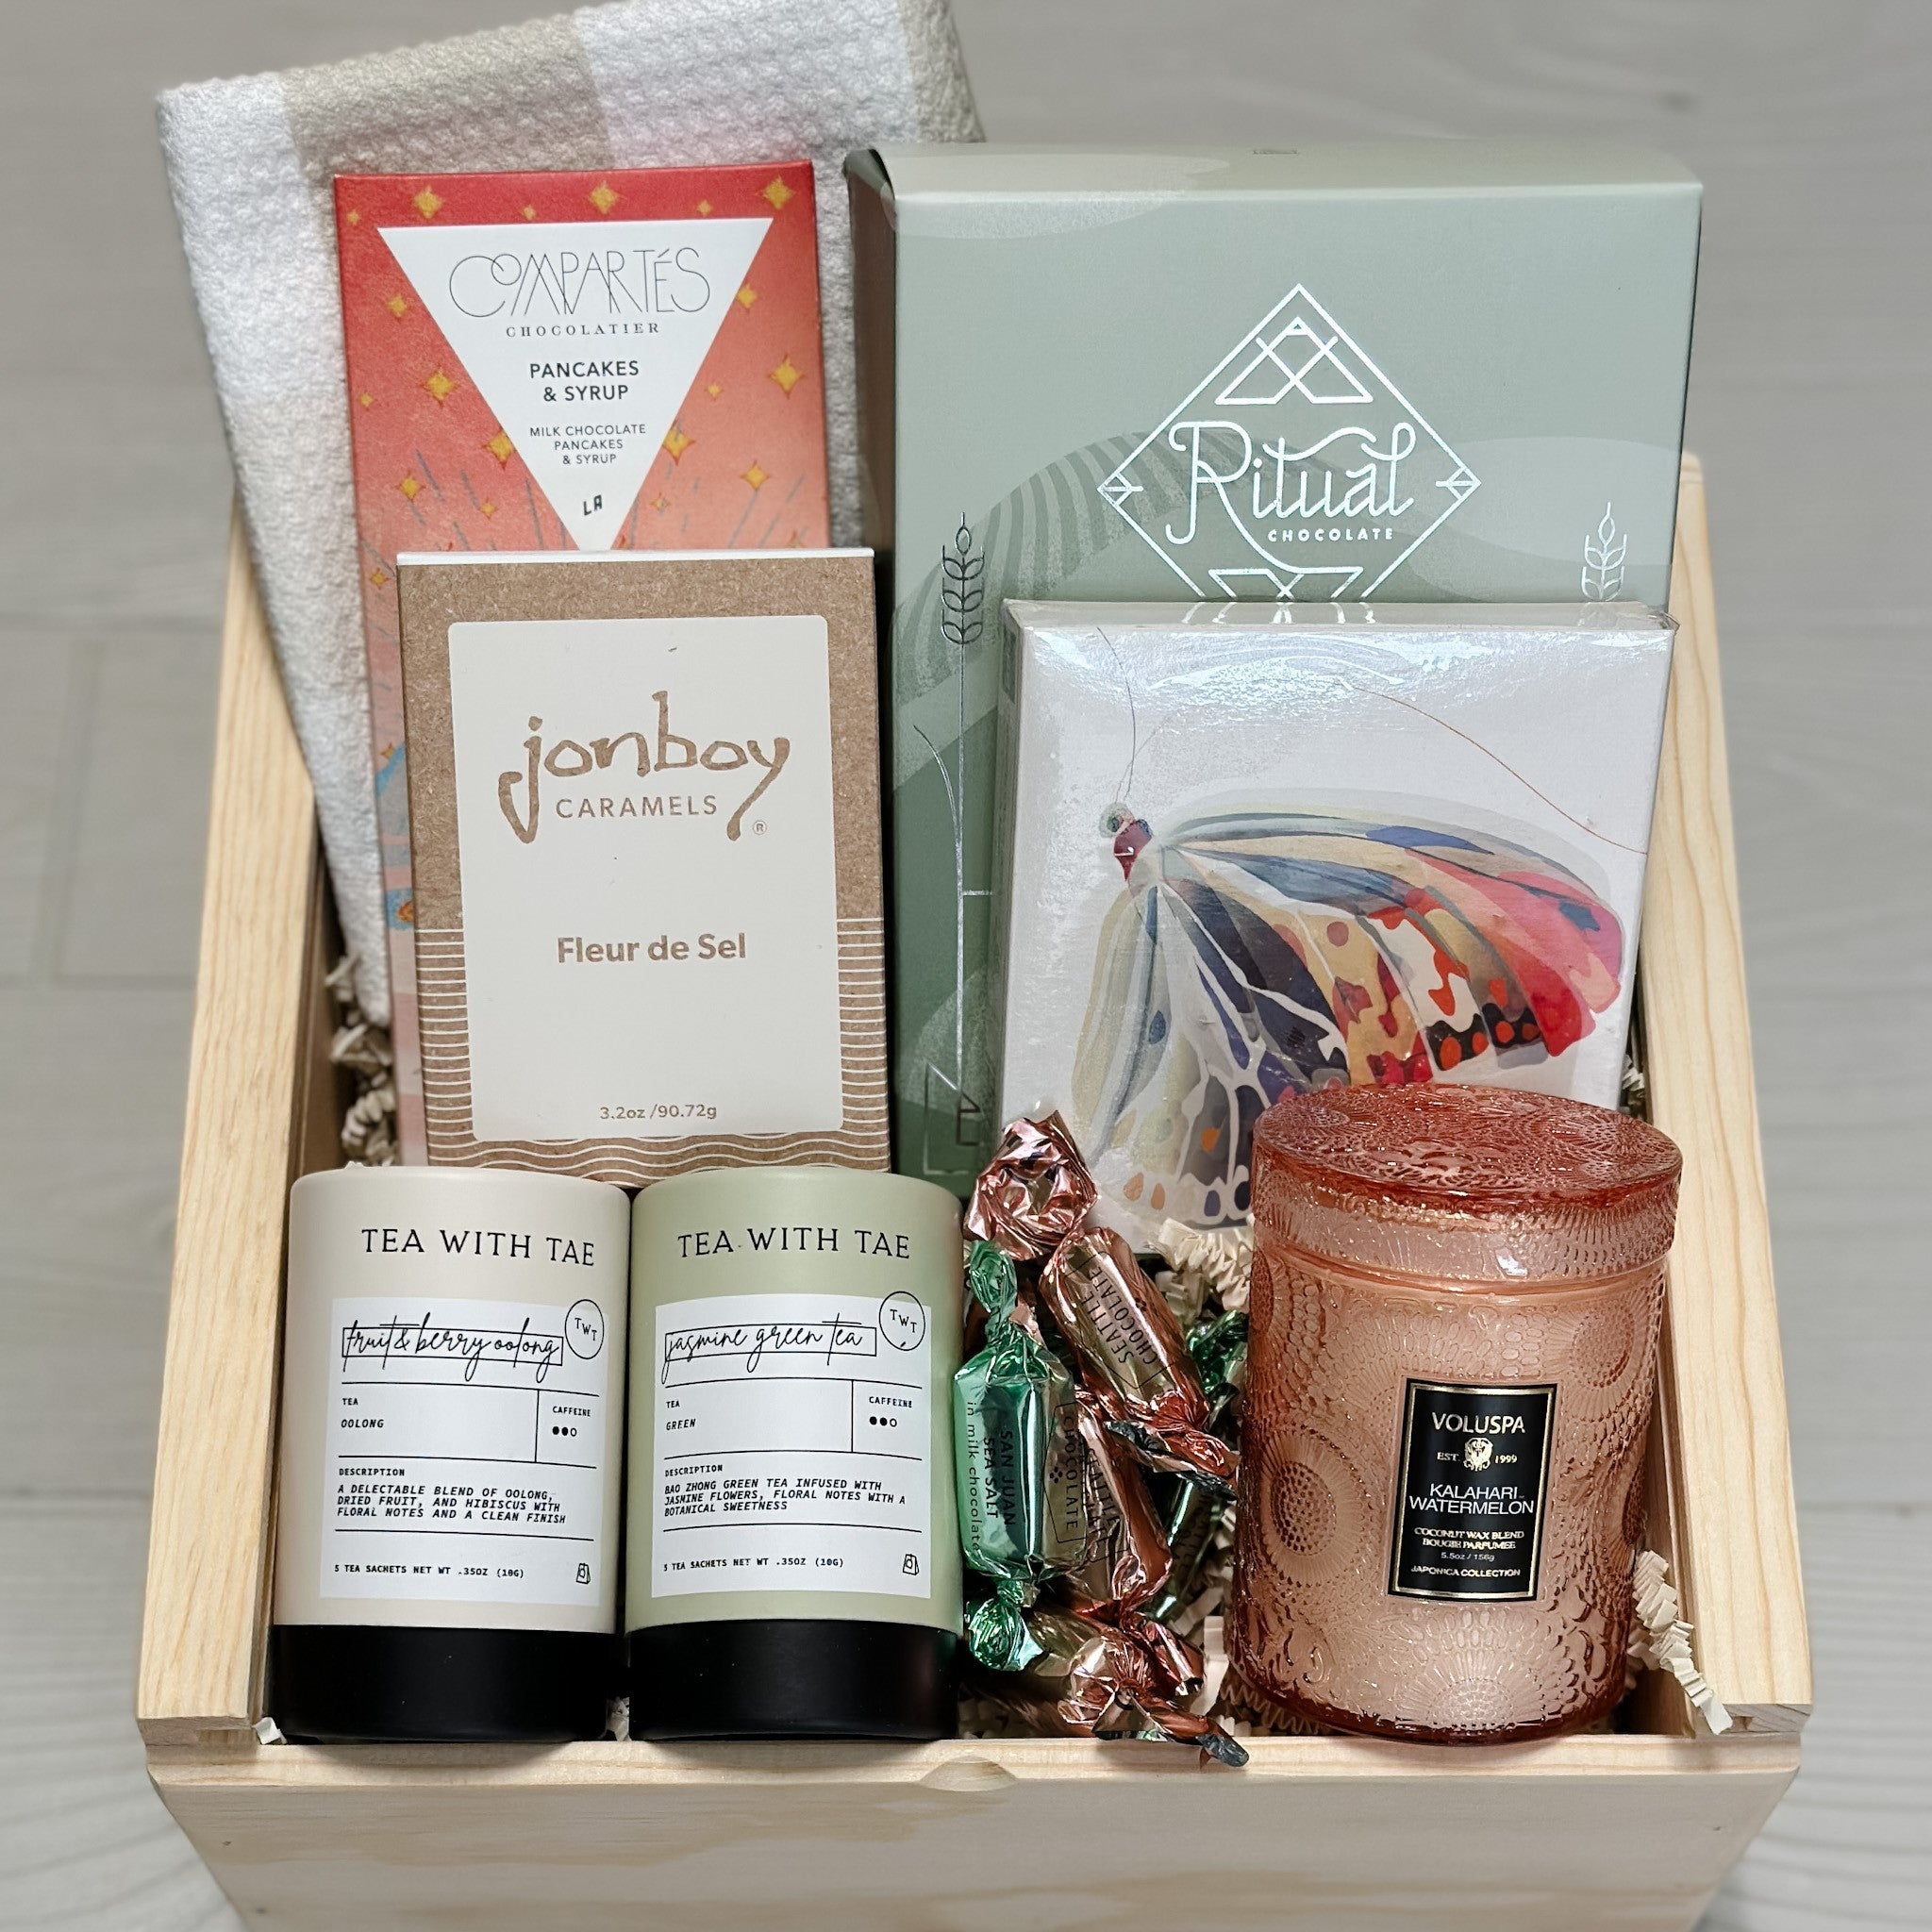 Granola, dish towel, chocolate, caramel, tea, candle and matches all included in our Let's Brunch gift basket